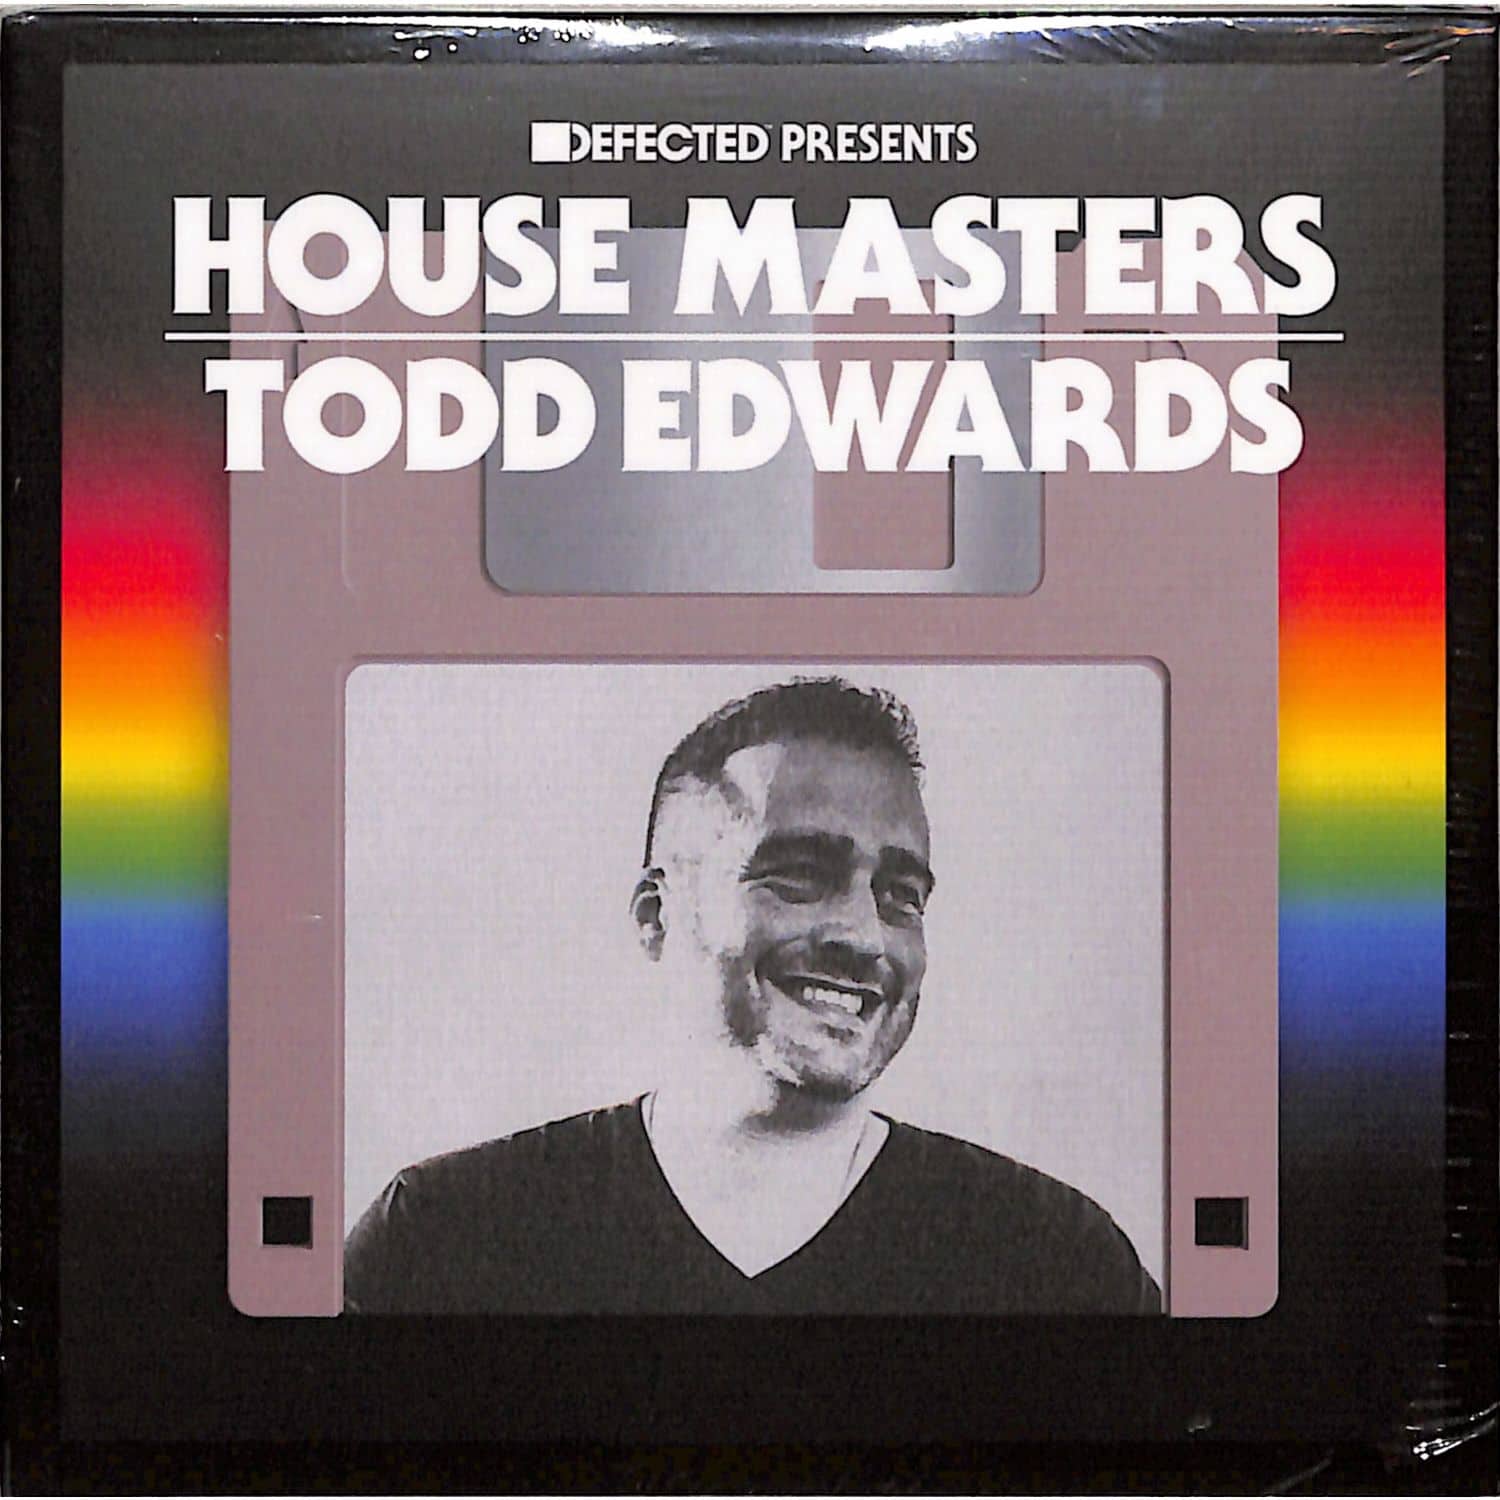 Todd Edwards - DEFECTED PRESENTS HOUSE MASTERS 